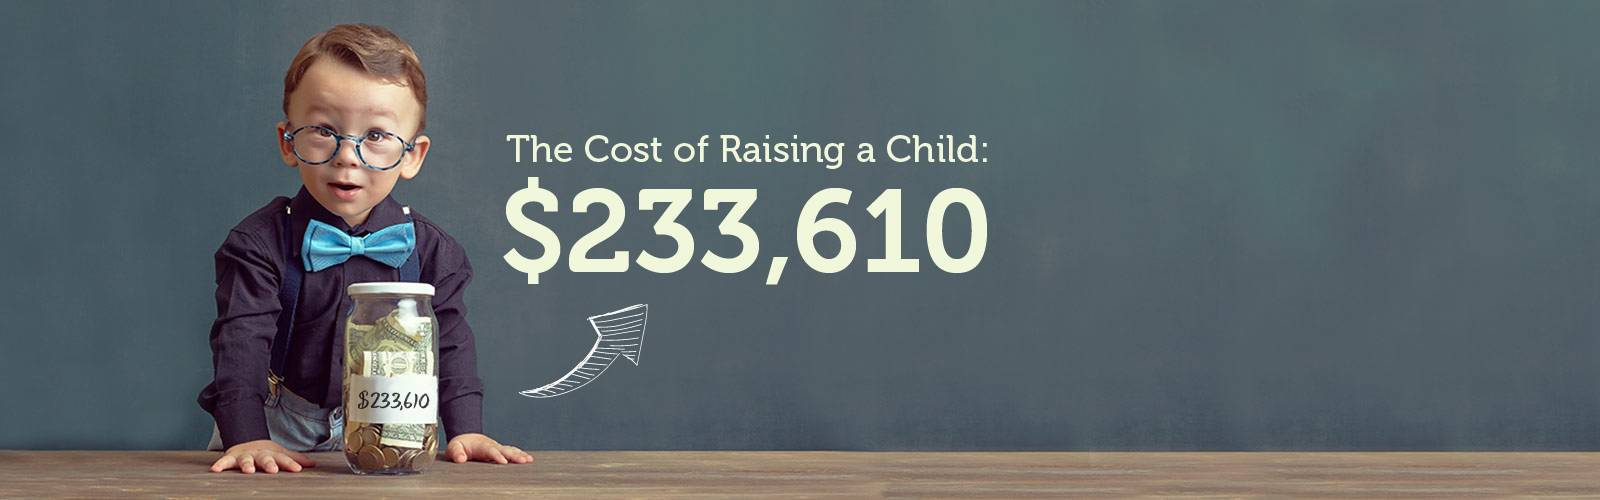 Cost of Raising a Child, 2015